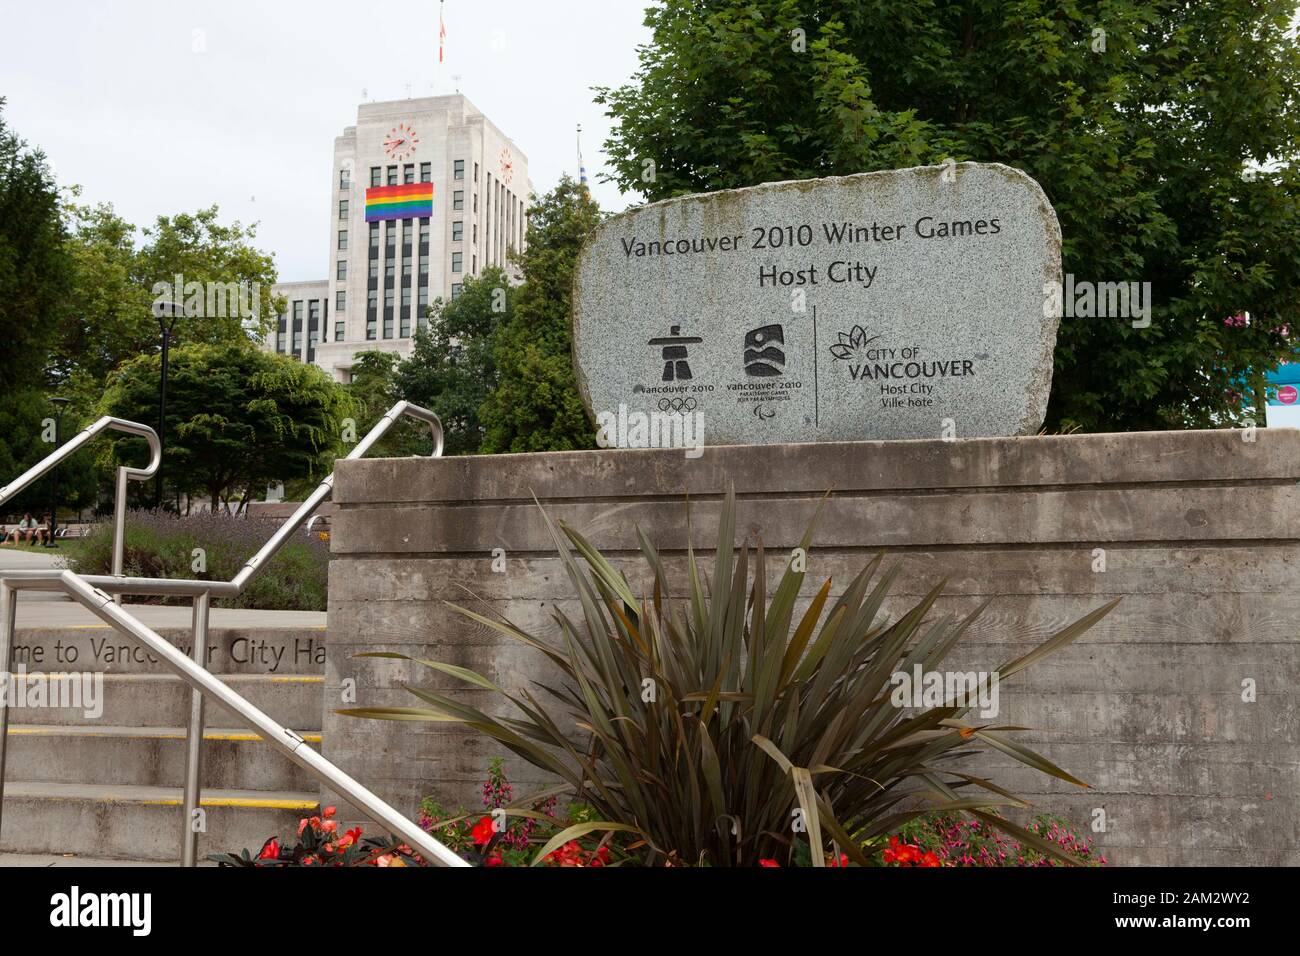 Vancouver 2010 Winter Games Host City monument, with Pride flag on Vancouver City Hall in background, Vancouver, Canada Stock Photo